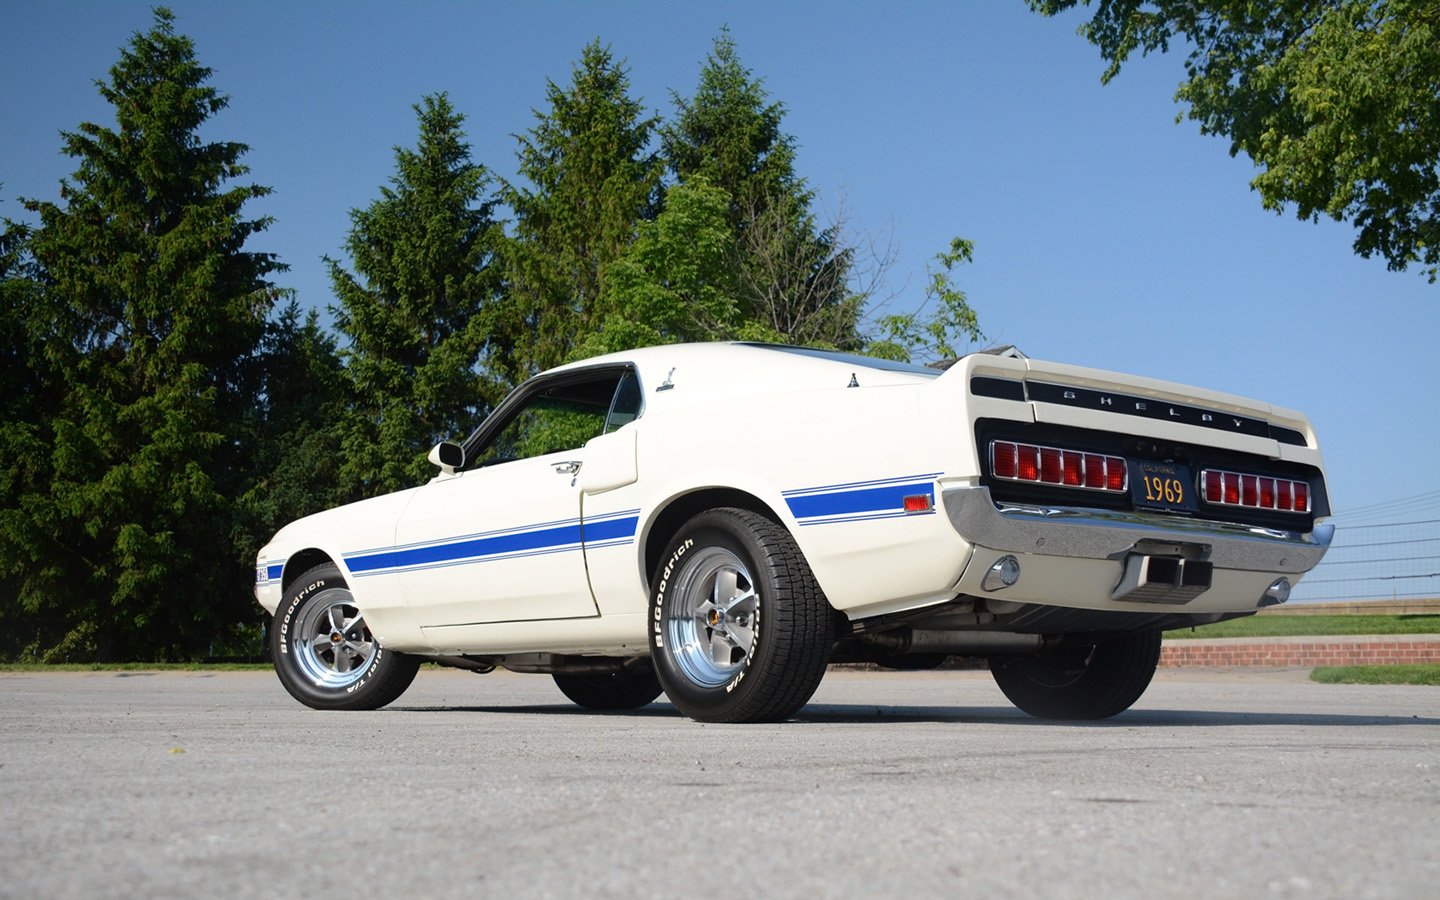 1969, Shelby, Gt350, Fastback, Ford, Mustang, Cars, White Wallpaper